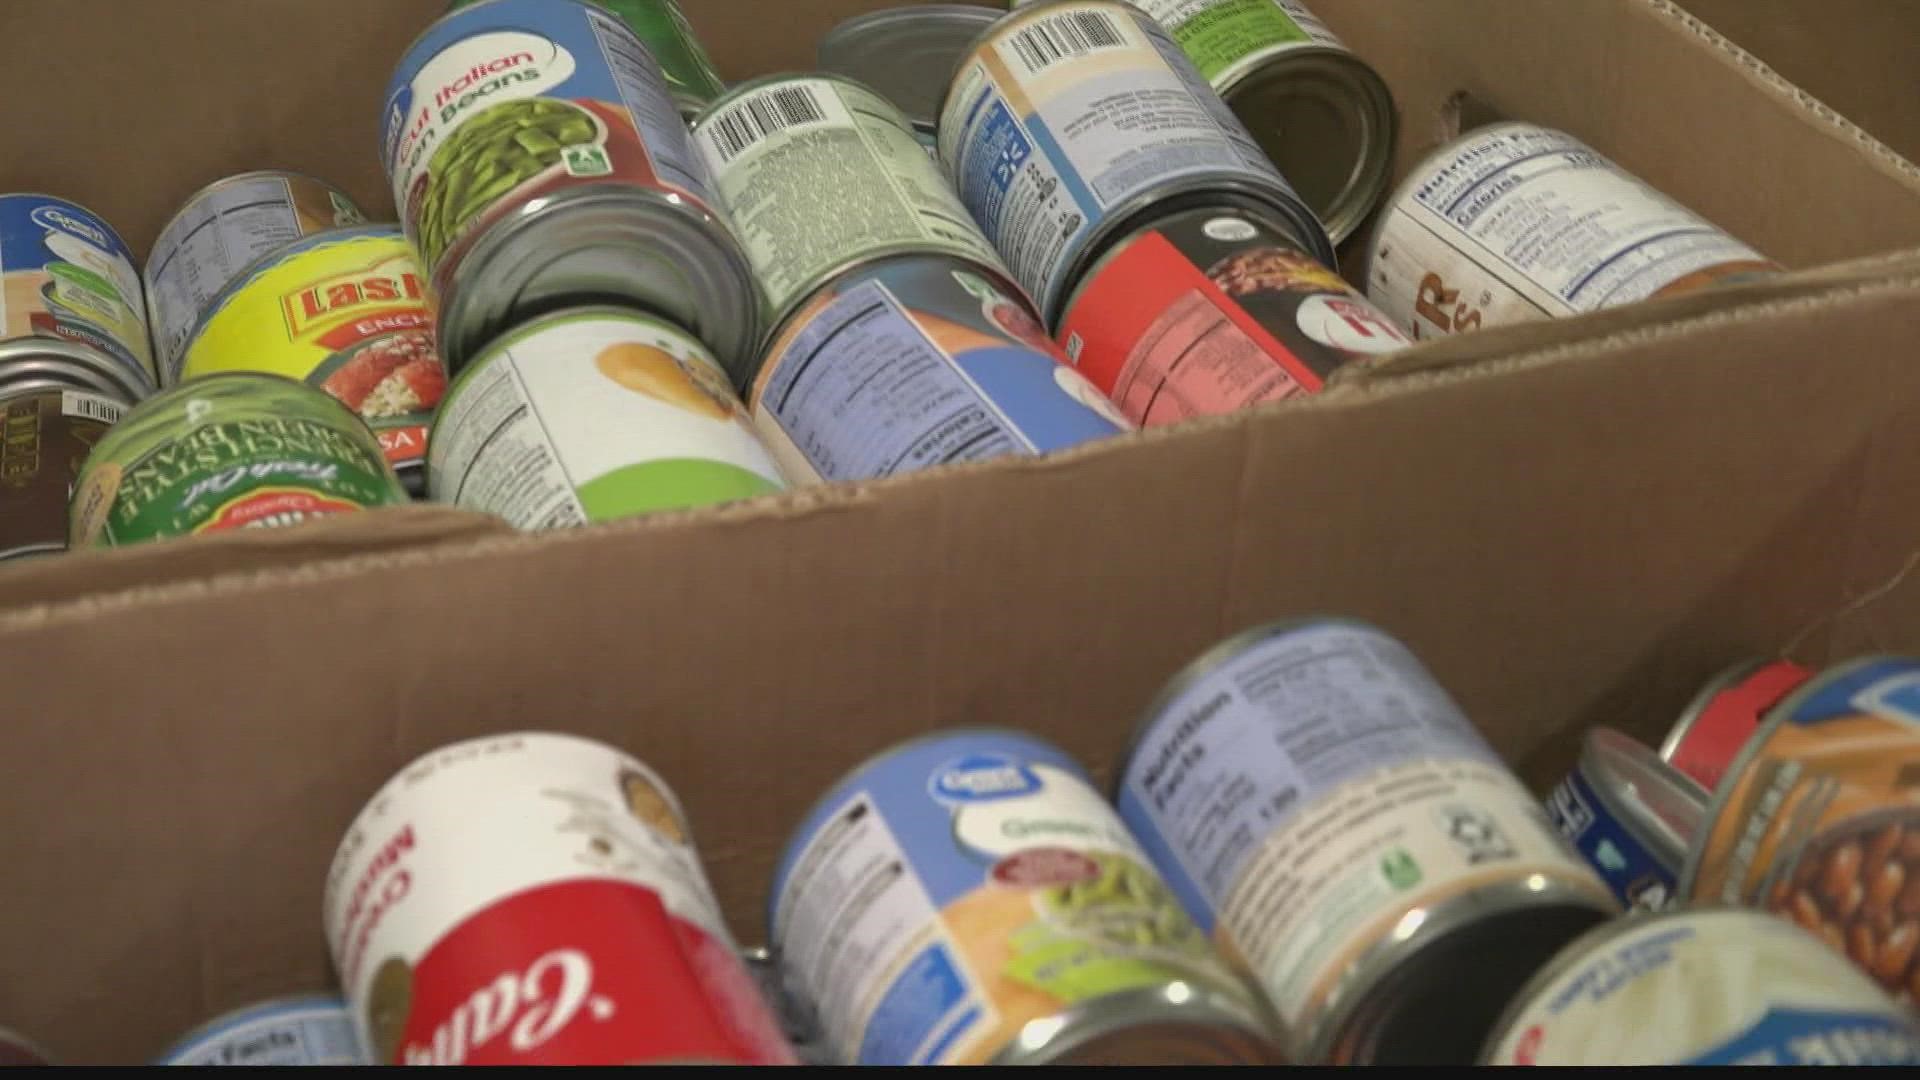 The Food Bank of North Alabama works to help people in need know where their next meal is coming from.